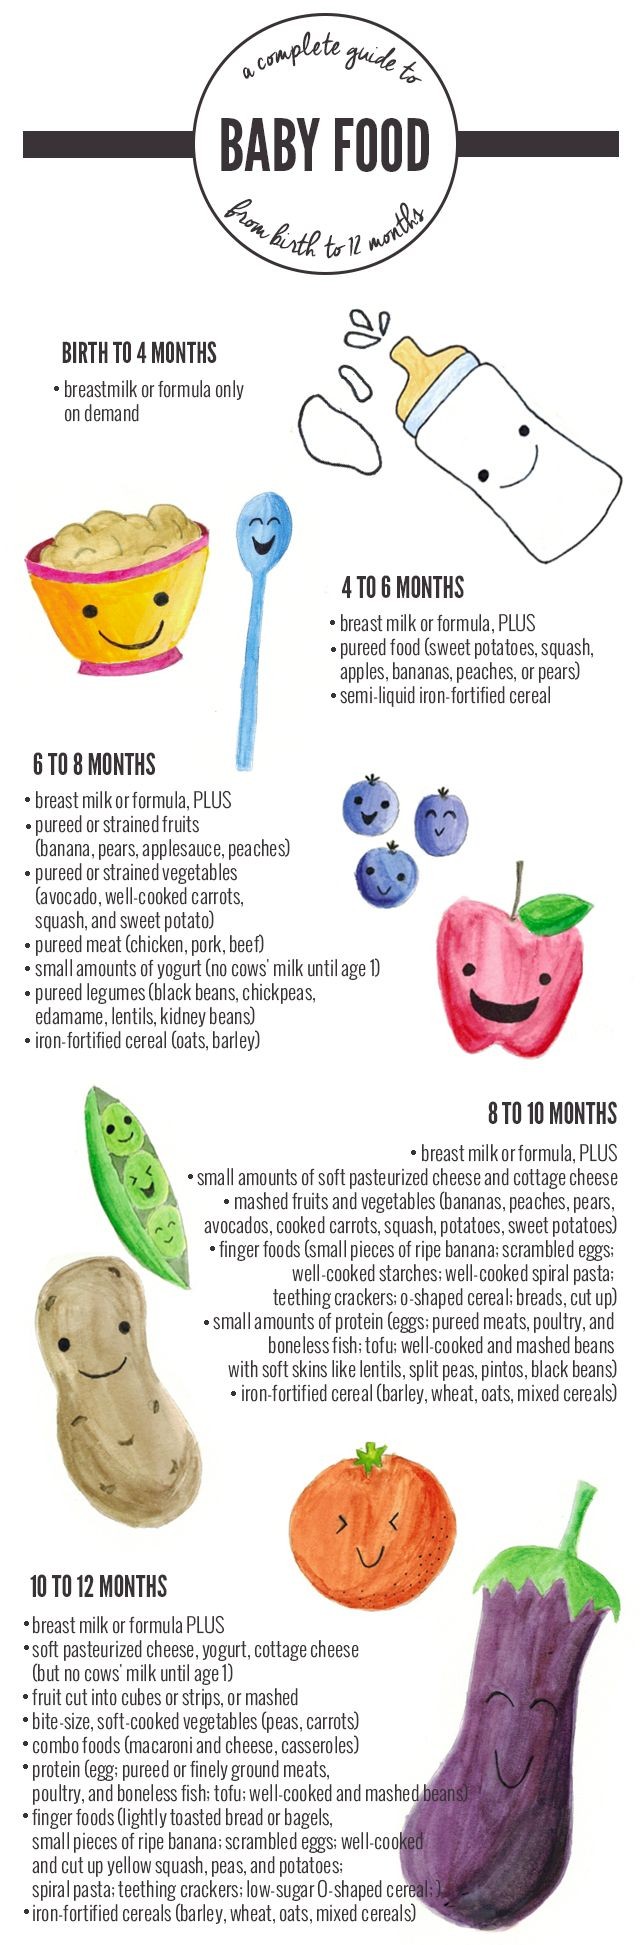 complete-baby-food-guide-chart-from-birth-to-12-months-except-nothing